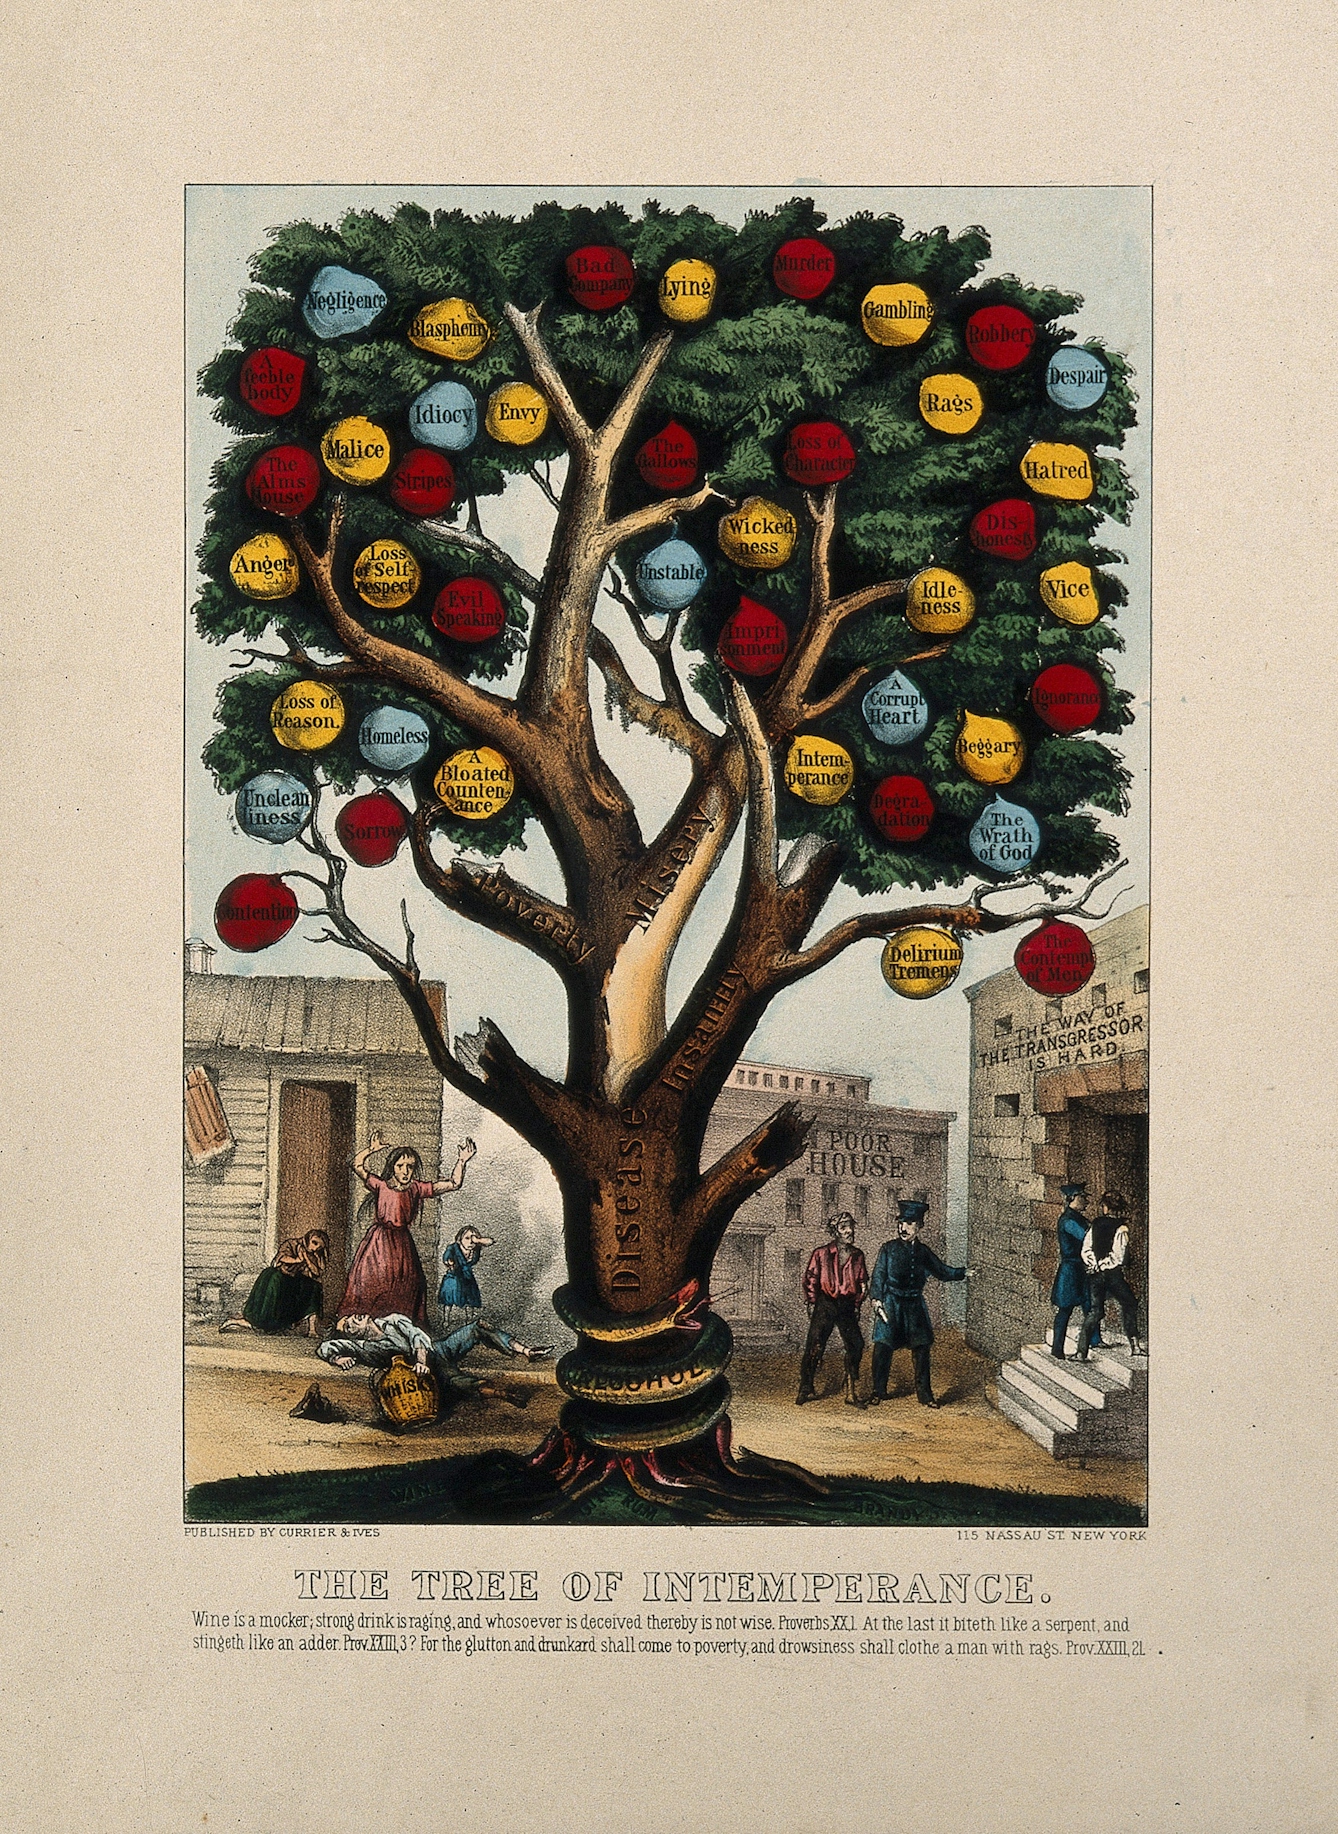 Colour lithograph depicting the tree of intemperance with fruit labelled with negative consequences of drinking including rags, hatred, despair, loss of self-respect and a bloated countenance.